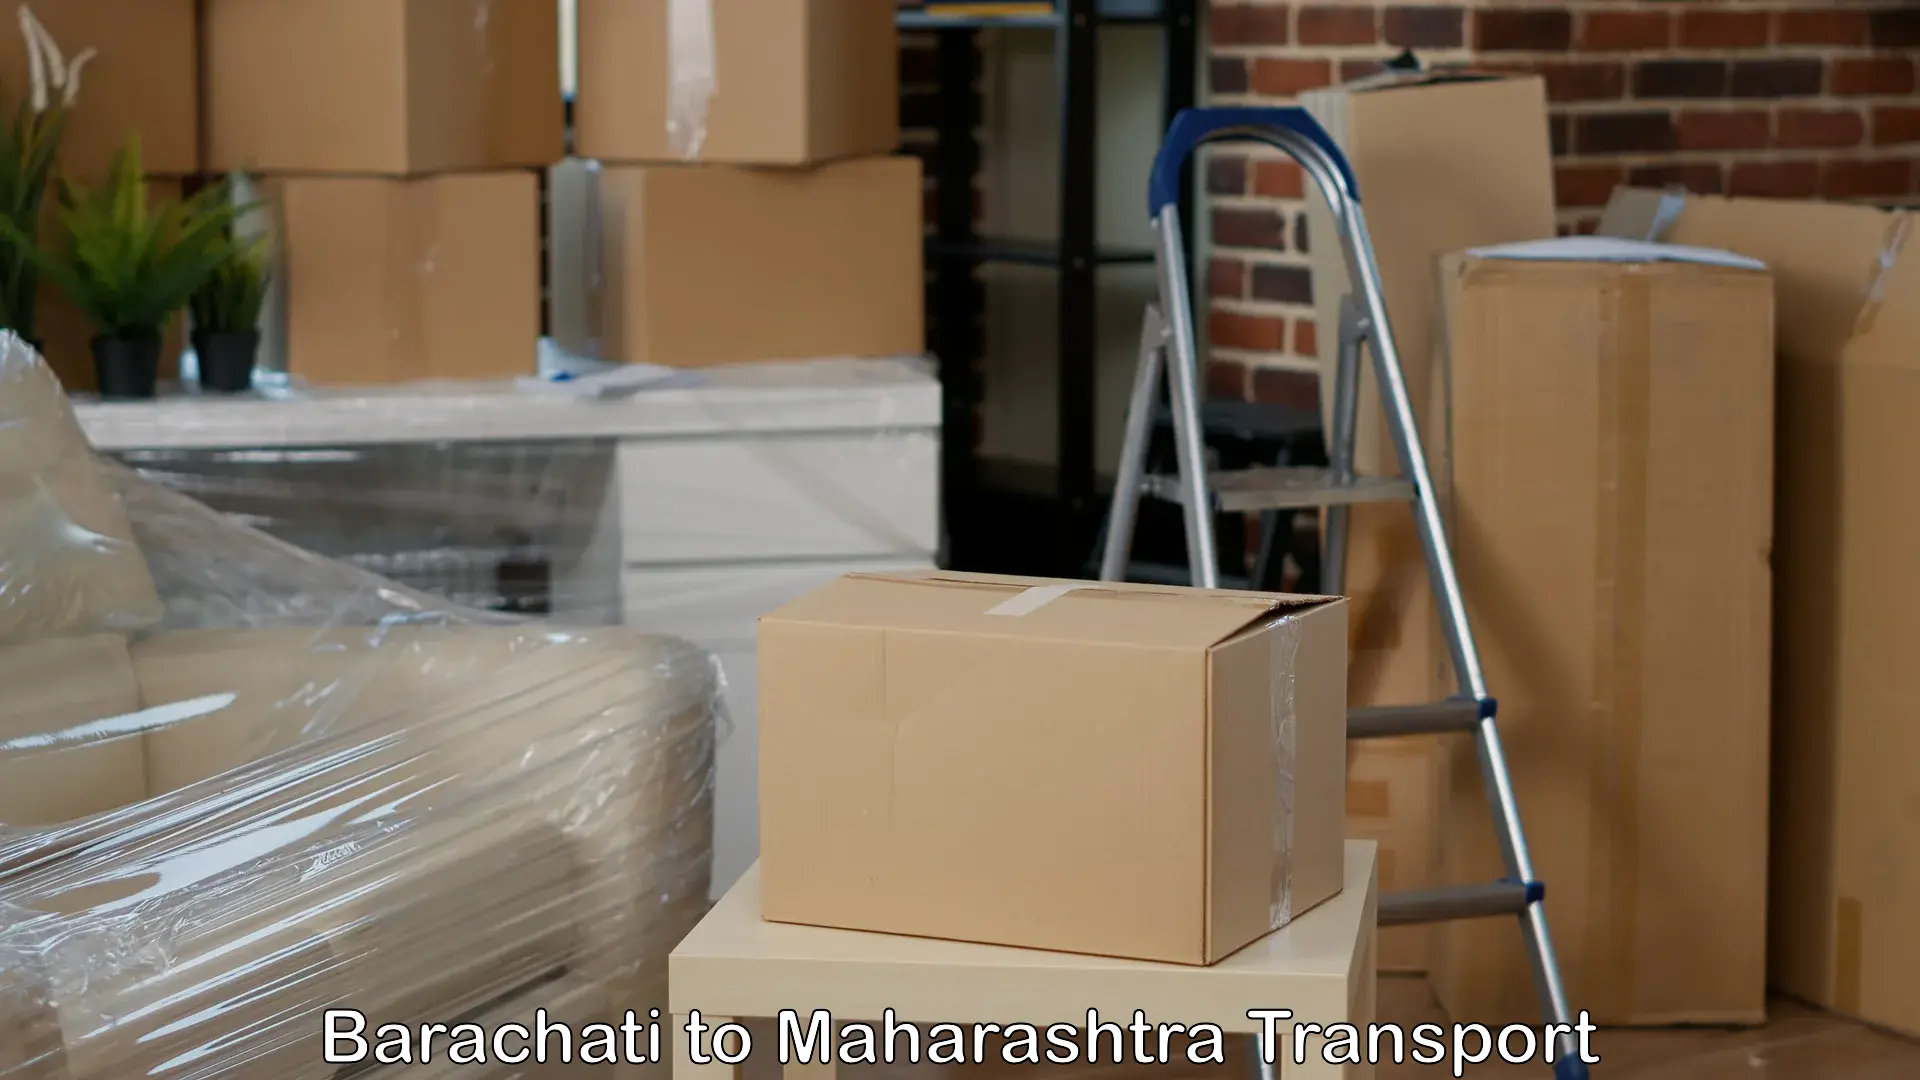 Commercial transport service Barachati to Alibag